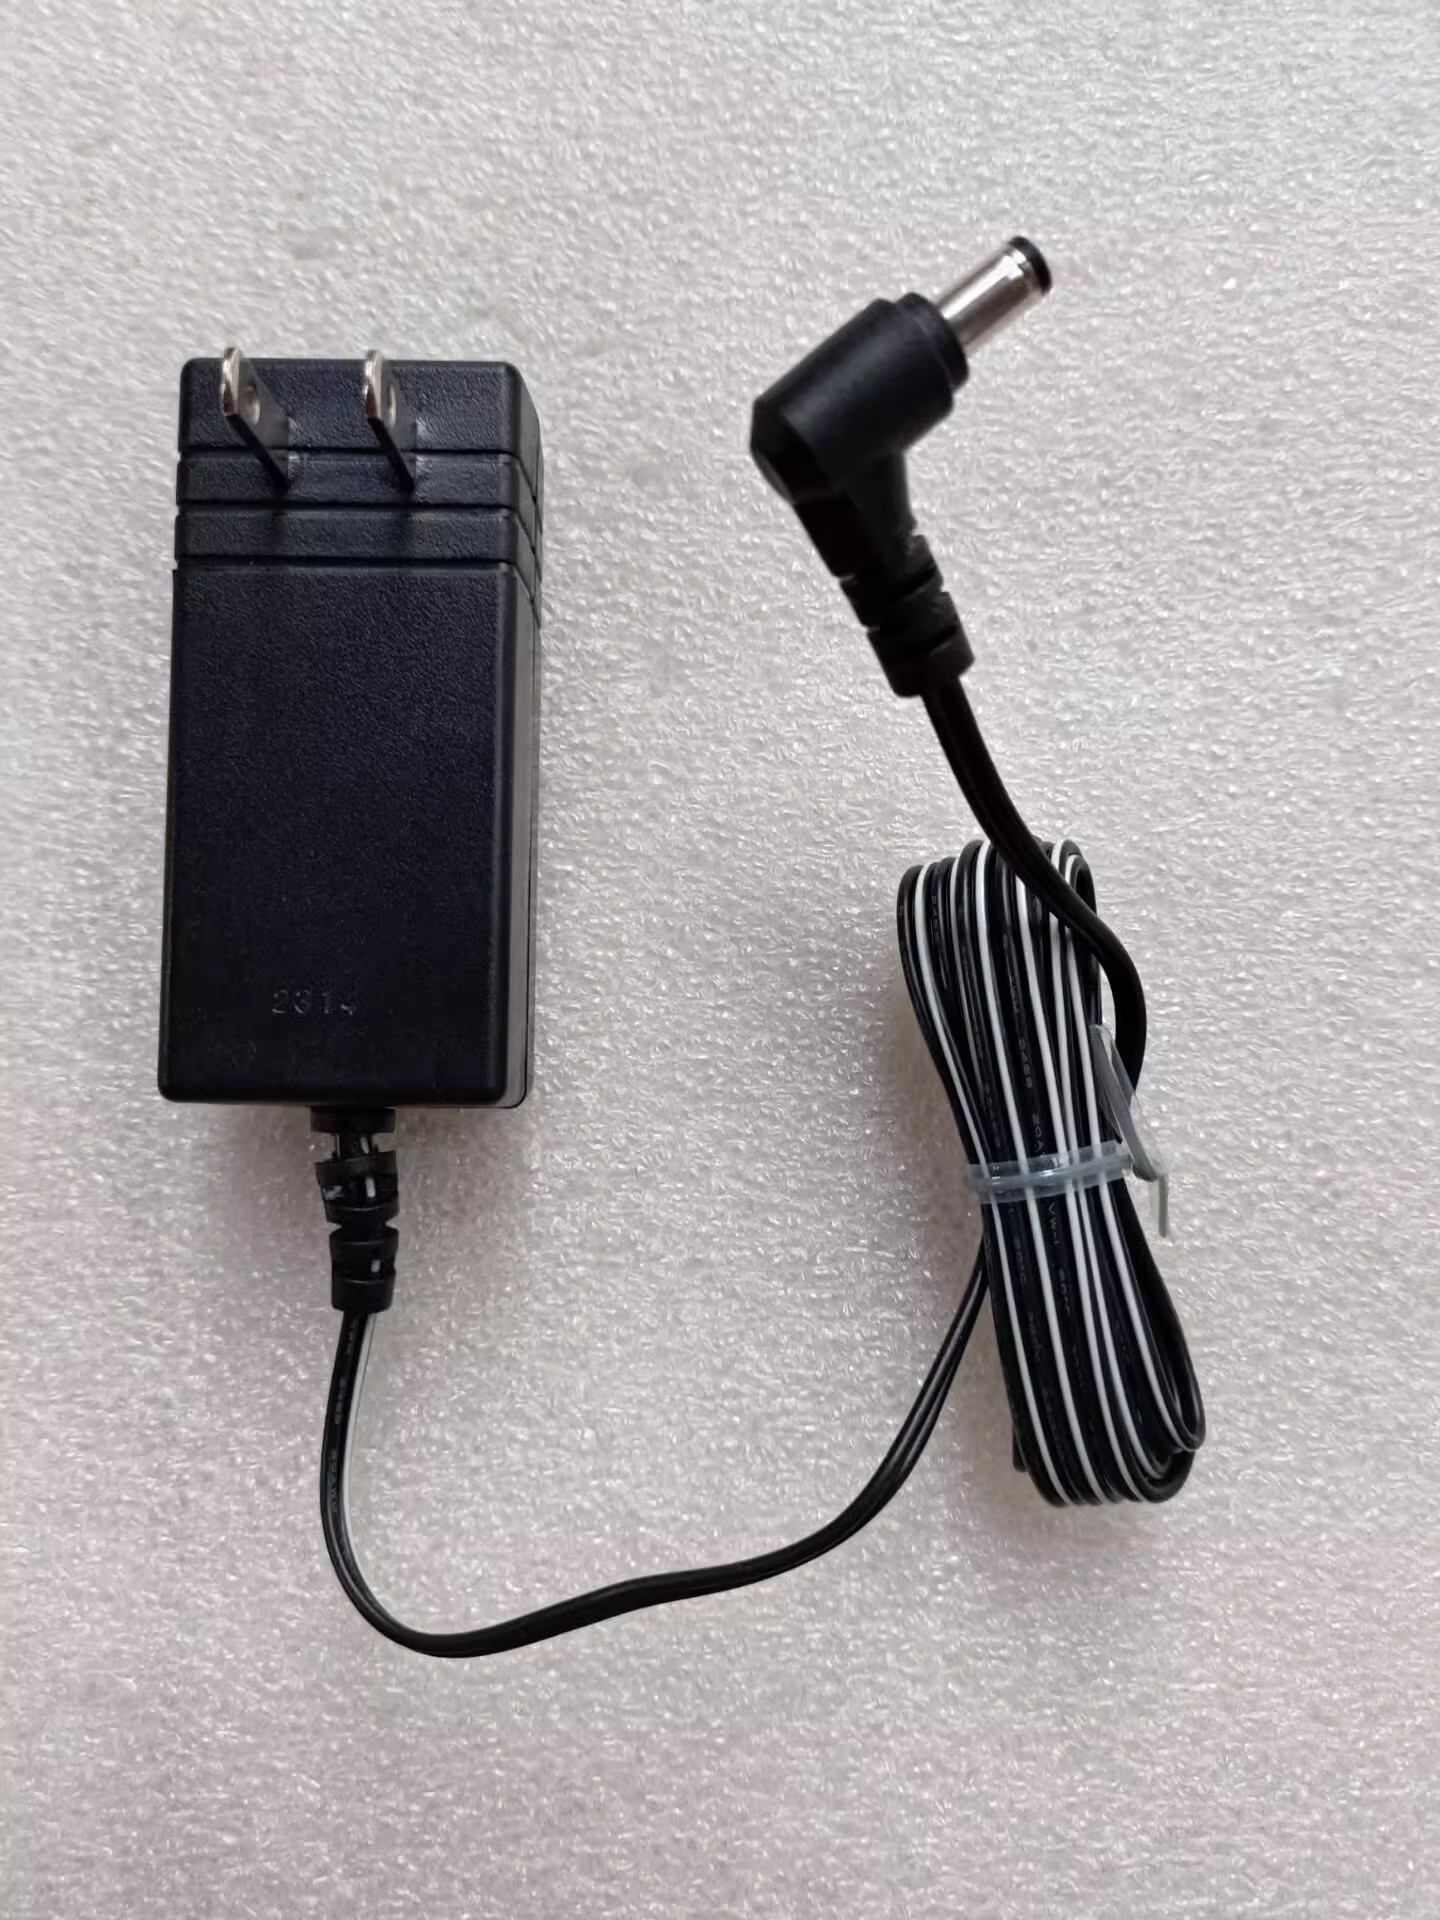 *Brand NEW* KENWOOD 9VD 1.0A AC DC ADAPTHE ACD-008A-CN POWER Supply